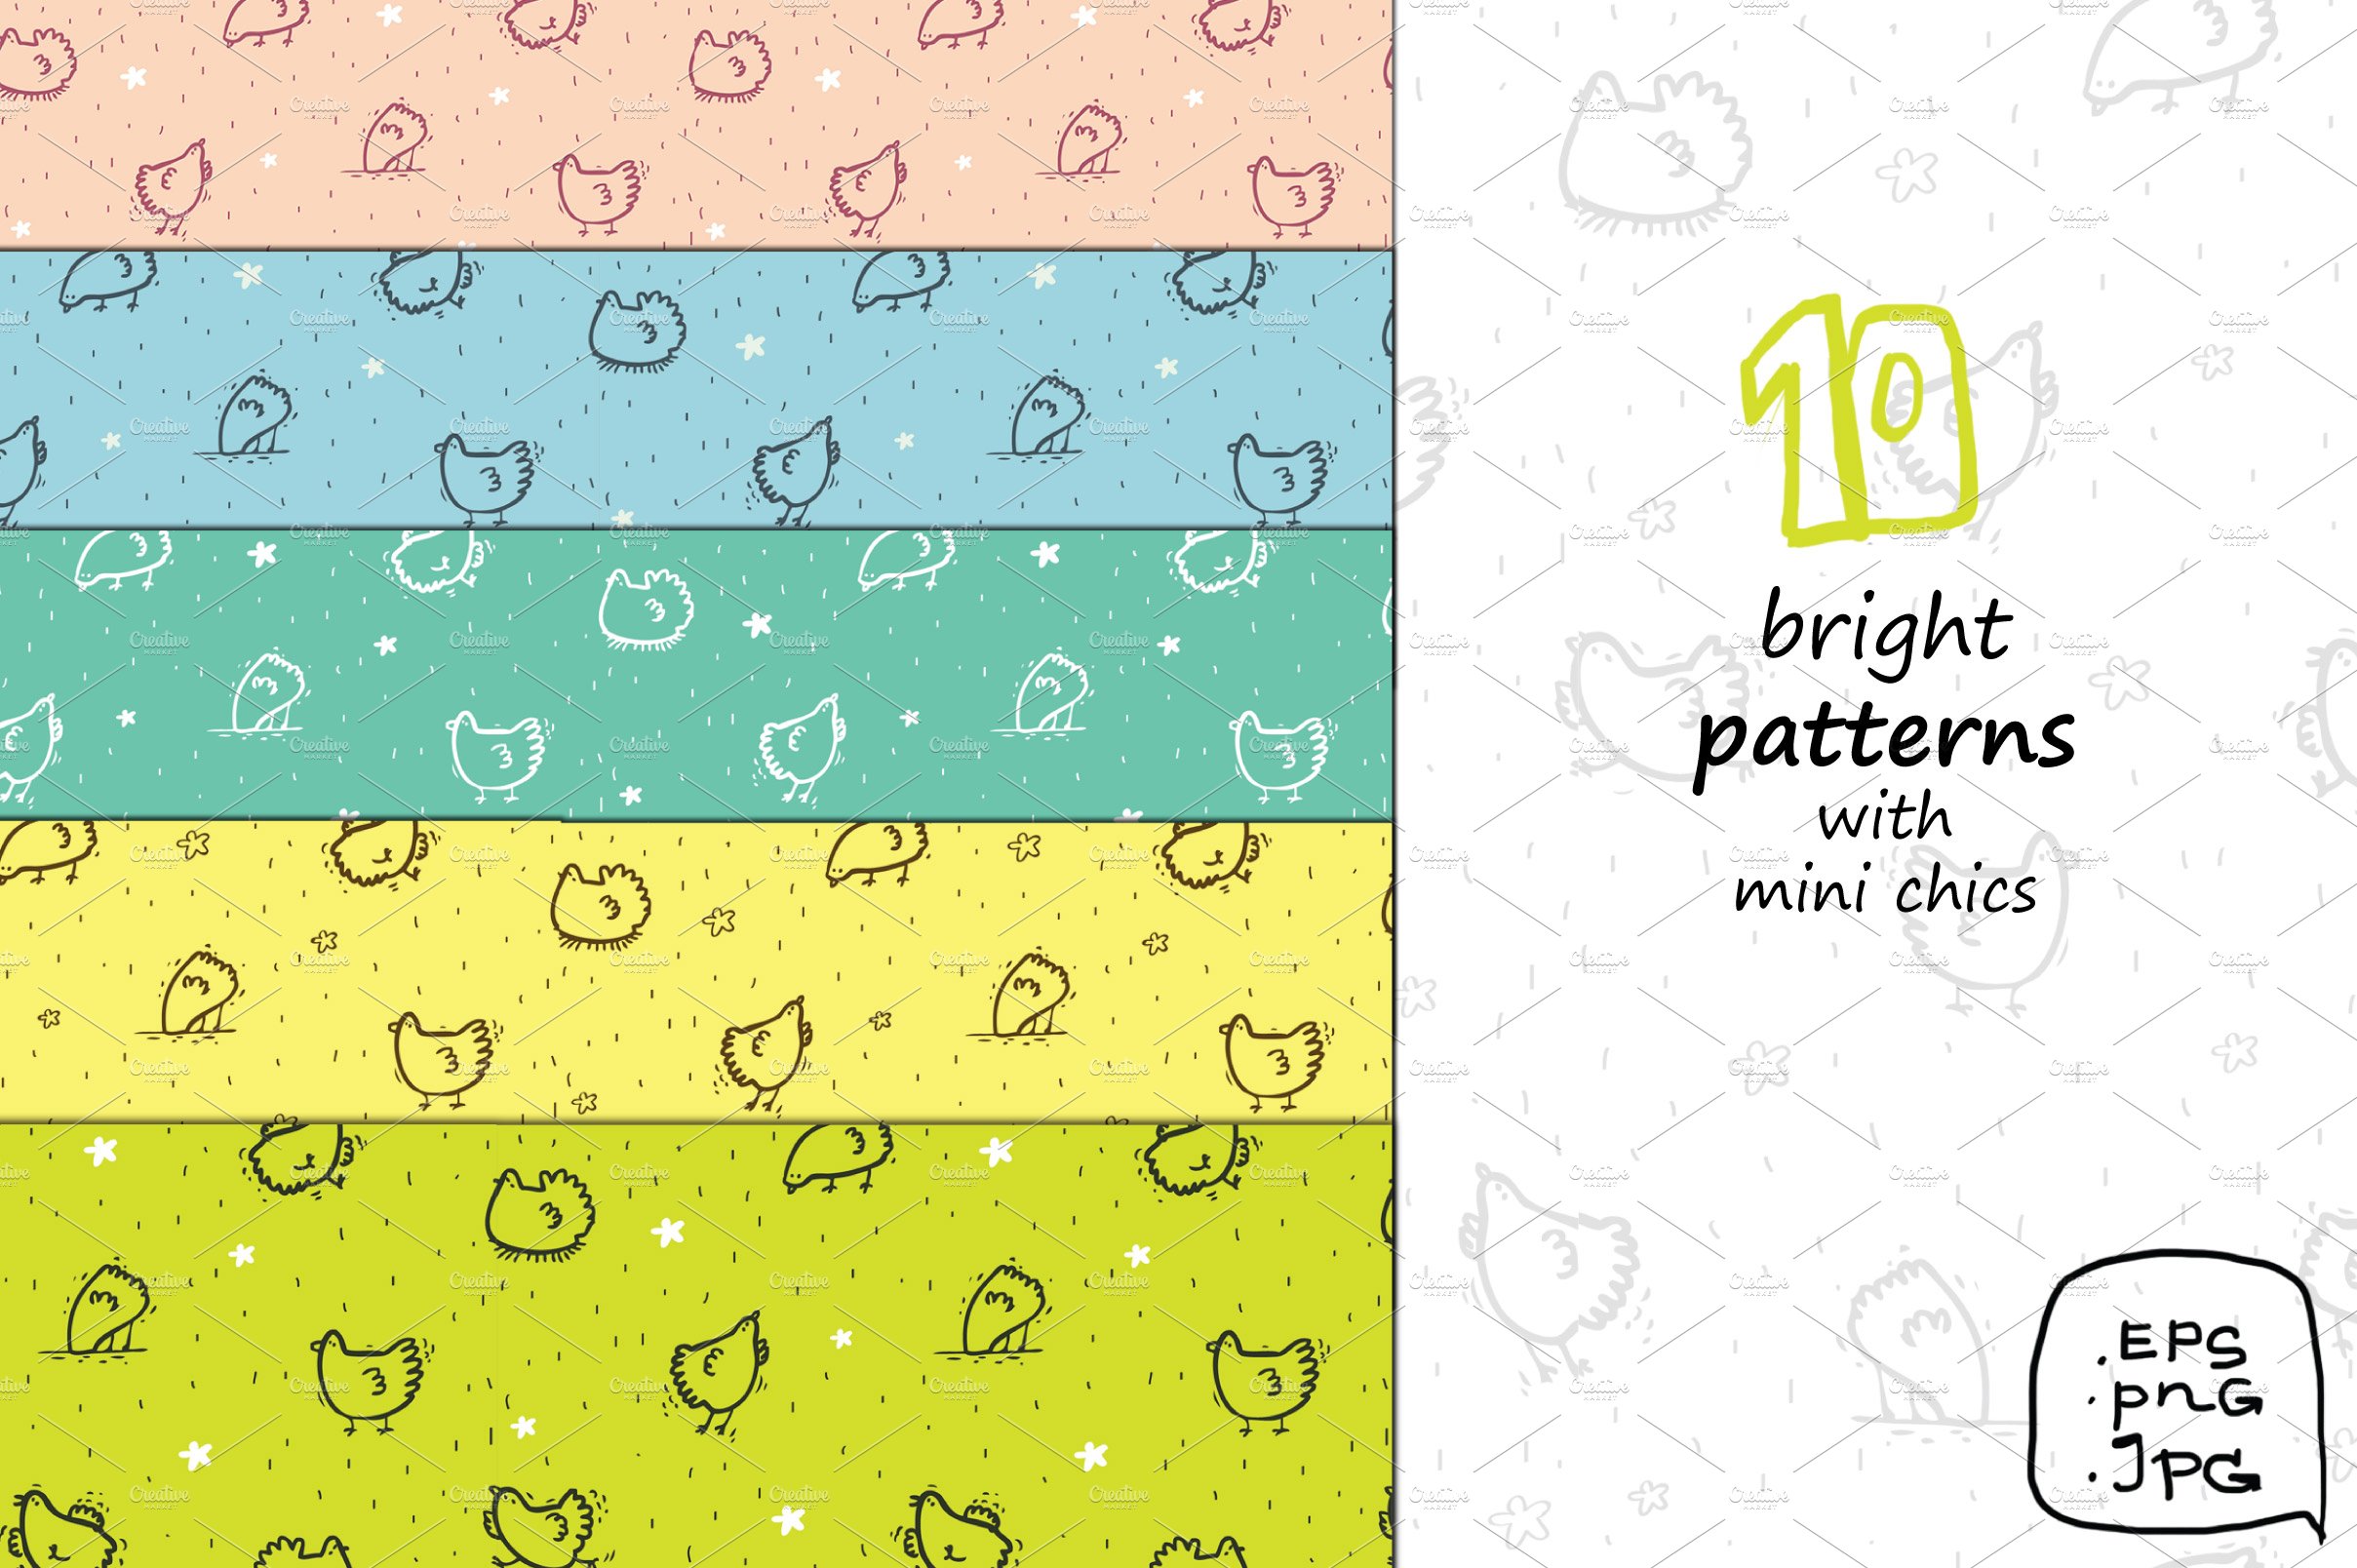 Wise Hens - 32 patterns+print preview image.